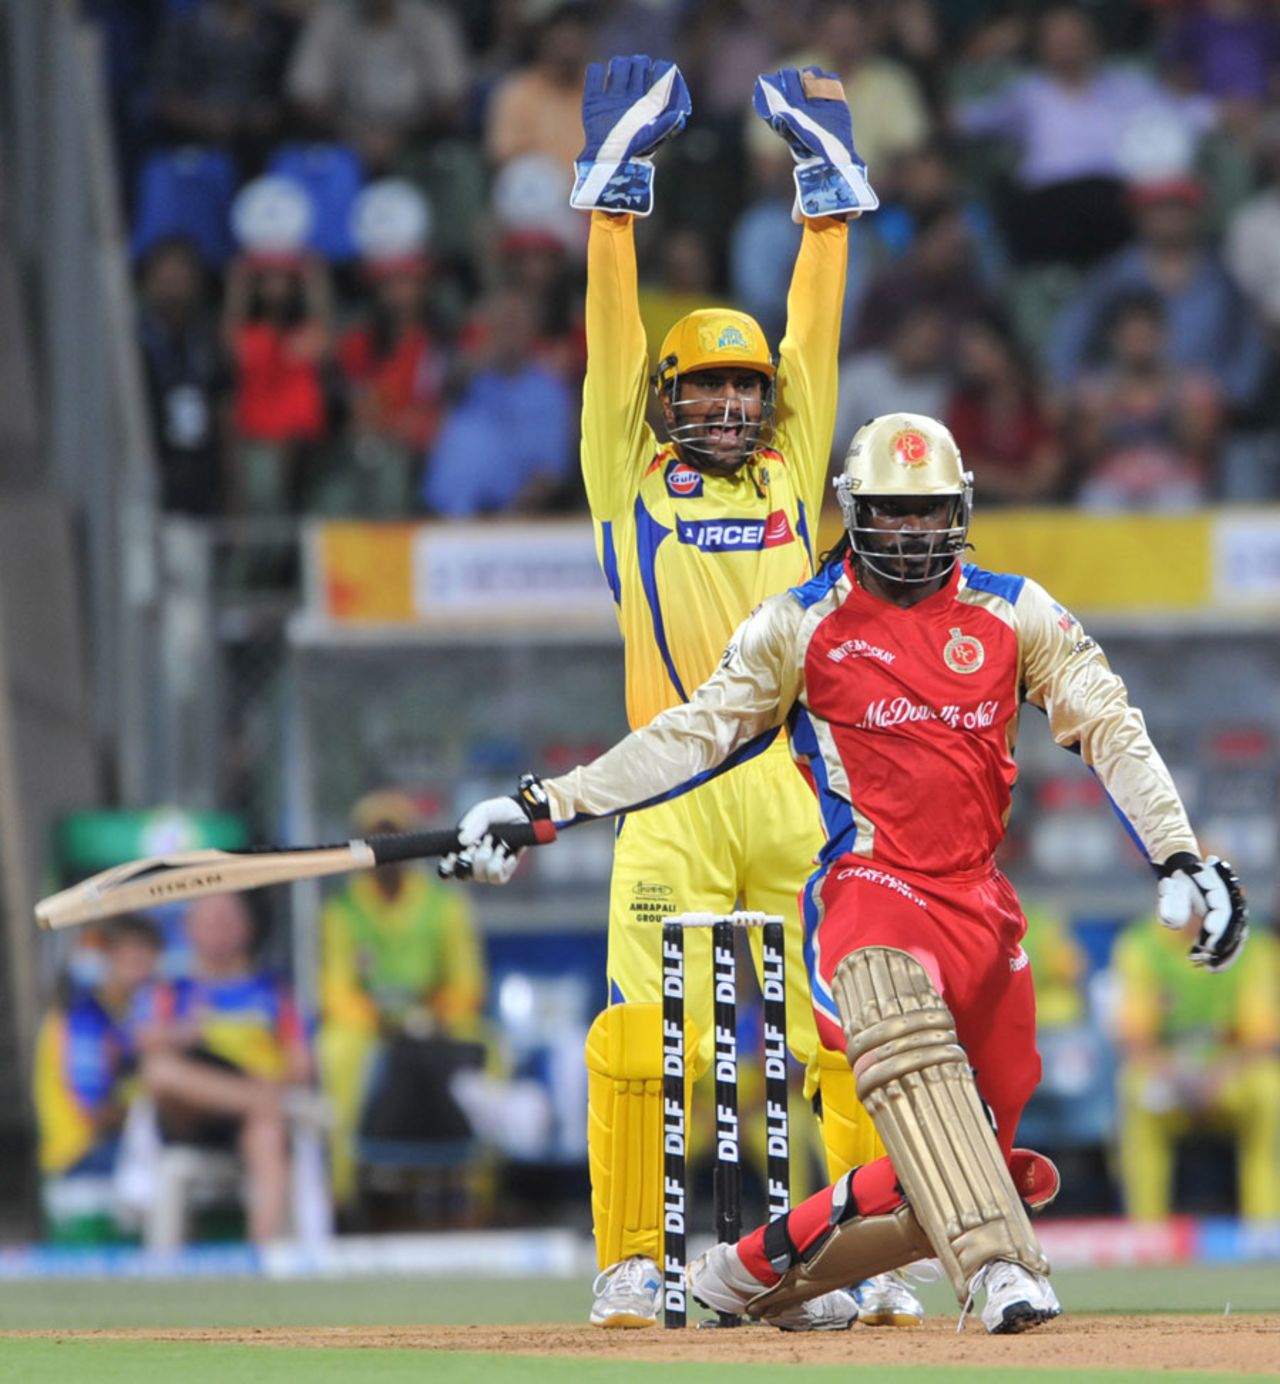 MS Dhoni appeals successfully for leg-before against Chris Gayle, Bangalore v Chennai, 1st qualifier, IPL 2011, Mumbai, May 24, 2011